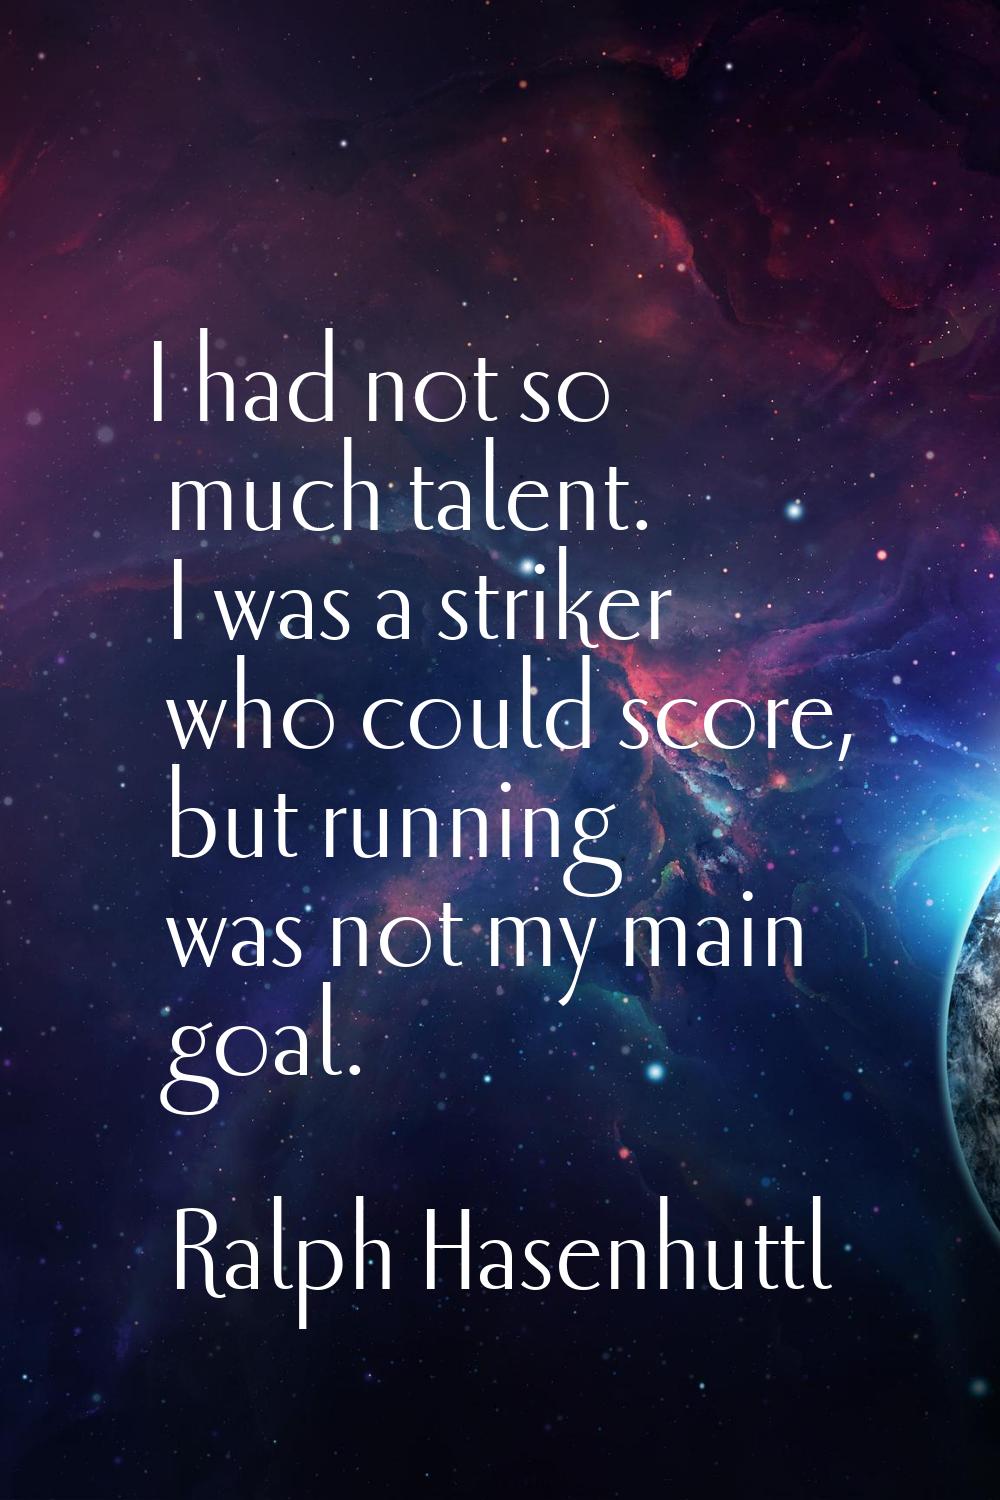 I had not so much talent. I was a striker who could score, but running was not my main goal.